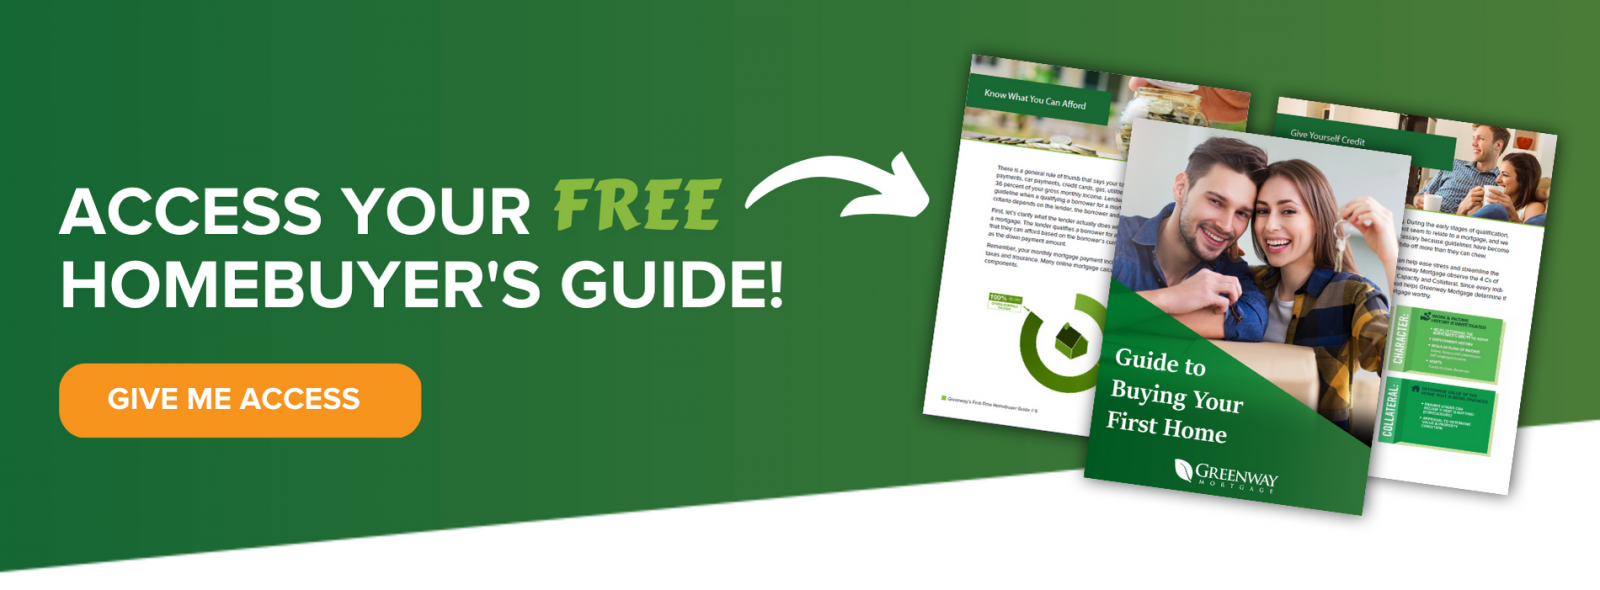 Download The Homebuyer Guide